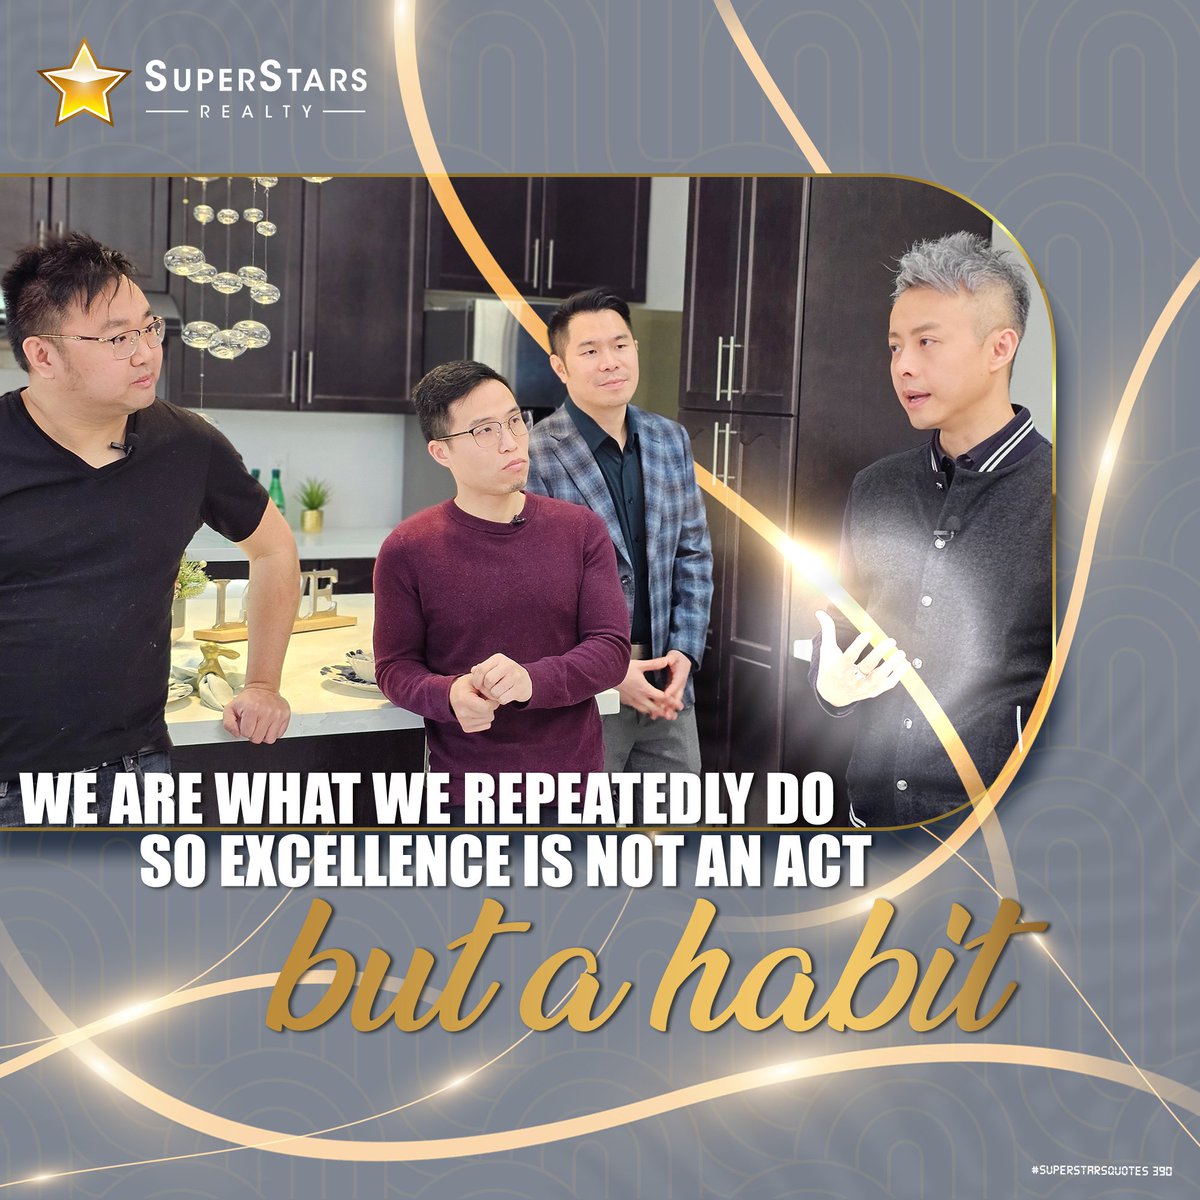 'WE ARE WHAT WE REPEATEDLY DO, SO EXCELLENCE IS NOT AN ACT, BUT A HABIT.'

SuperstarsRealty.com

#SuperstarsRealty #SuperstarsTeam #SuperstarsQuotes #Quotes #RealEstateQuotes #EntrepreneurQuotes #BusinessQuotes #SuccessQuotes #MotivationalQuotes #InspirationalQuotes